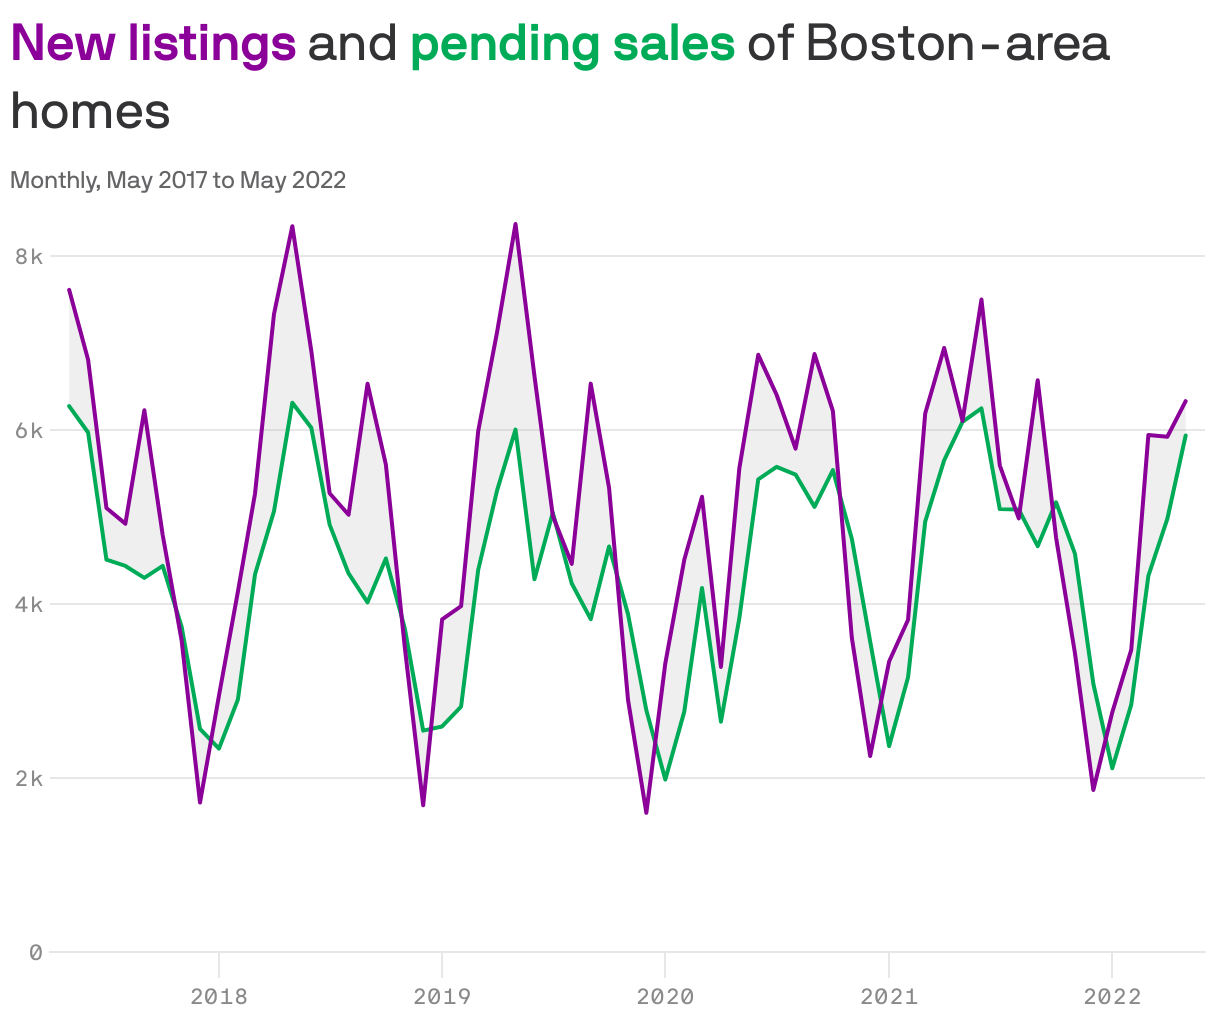 <b style='color: #8a0098'>New listings</b> and <b style='color: #00ab58'>pending sales</b> of Boston-area homes